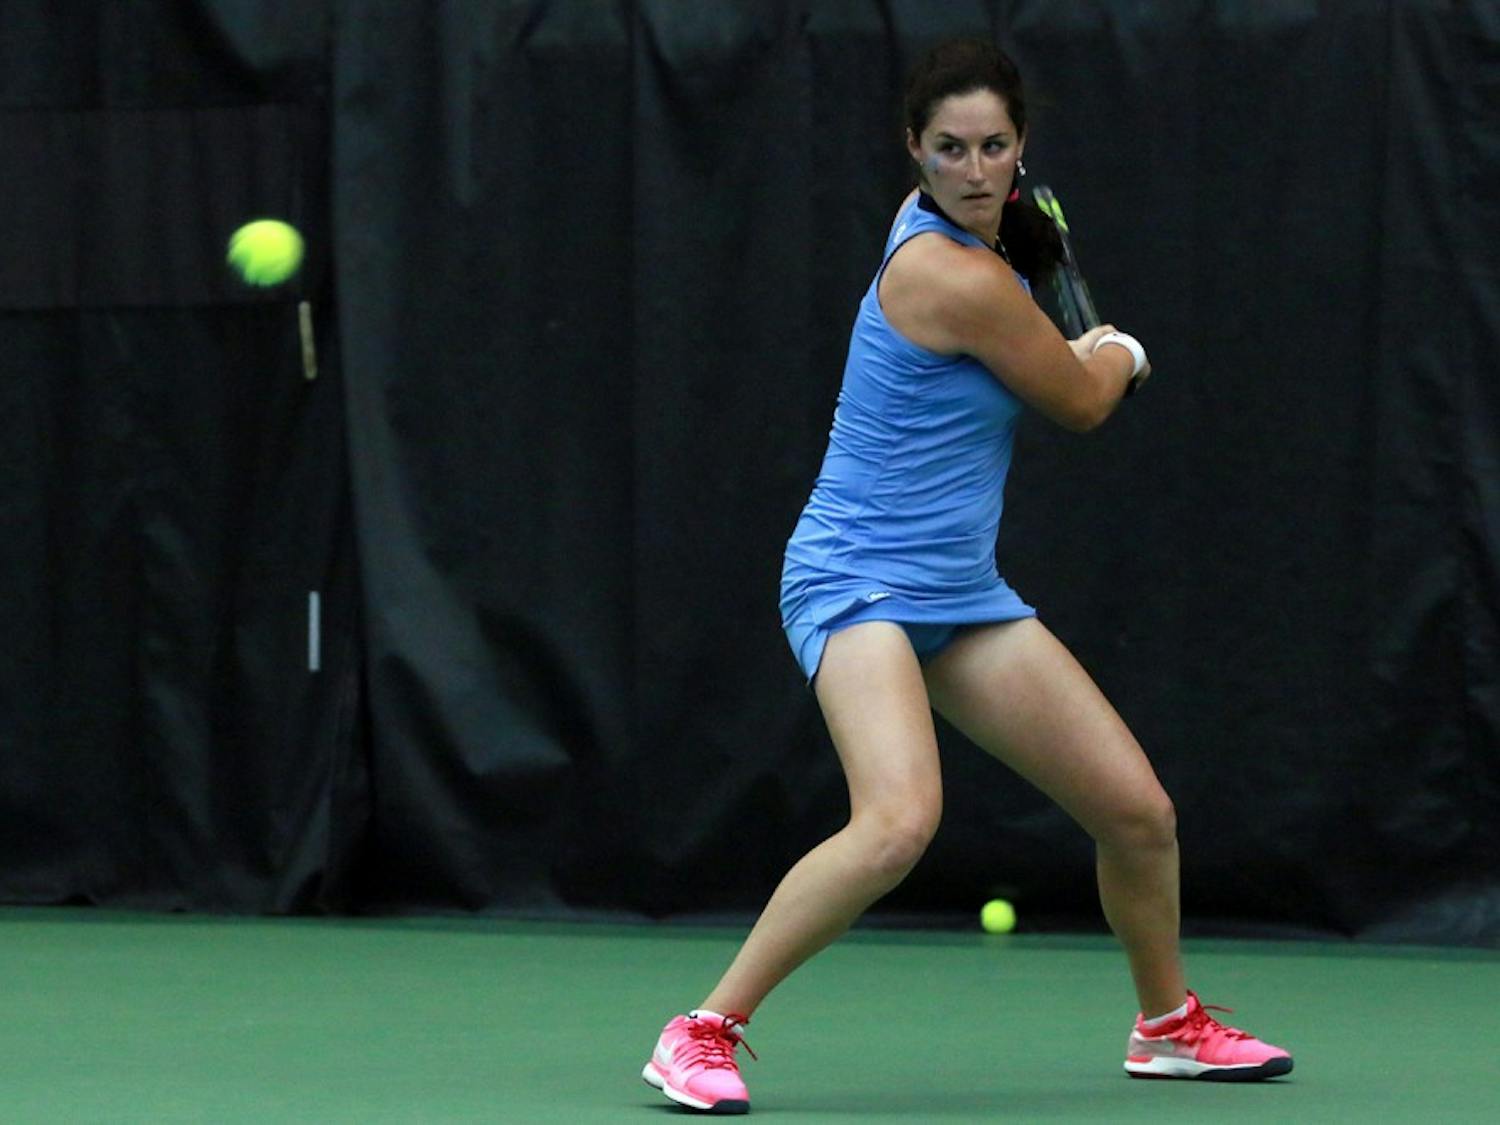 Sophomore Jamie Loeb hits the ball back on Wednesday in a match against Duke. Loeb defeated Beatrice Capra during the singles competition.